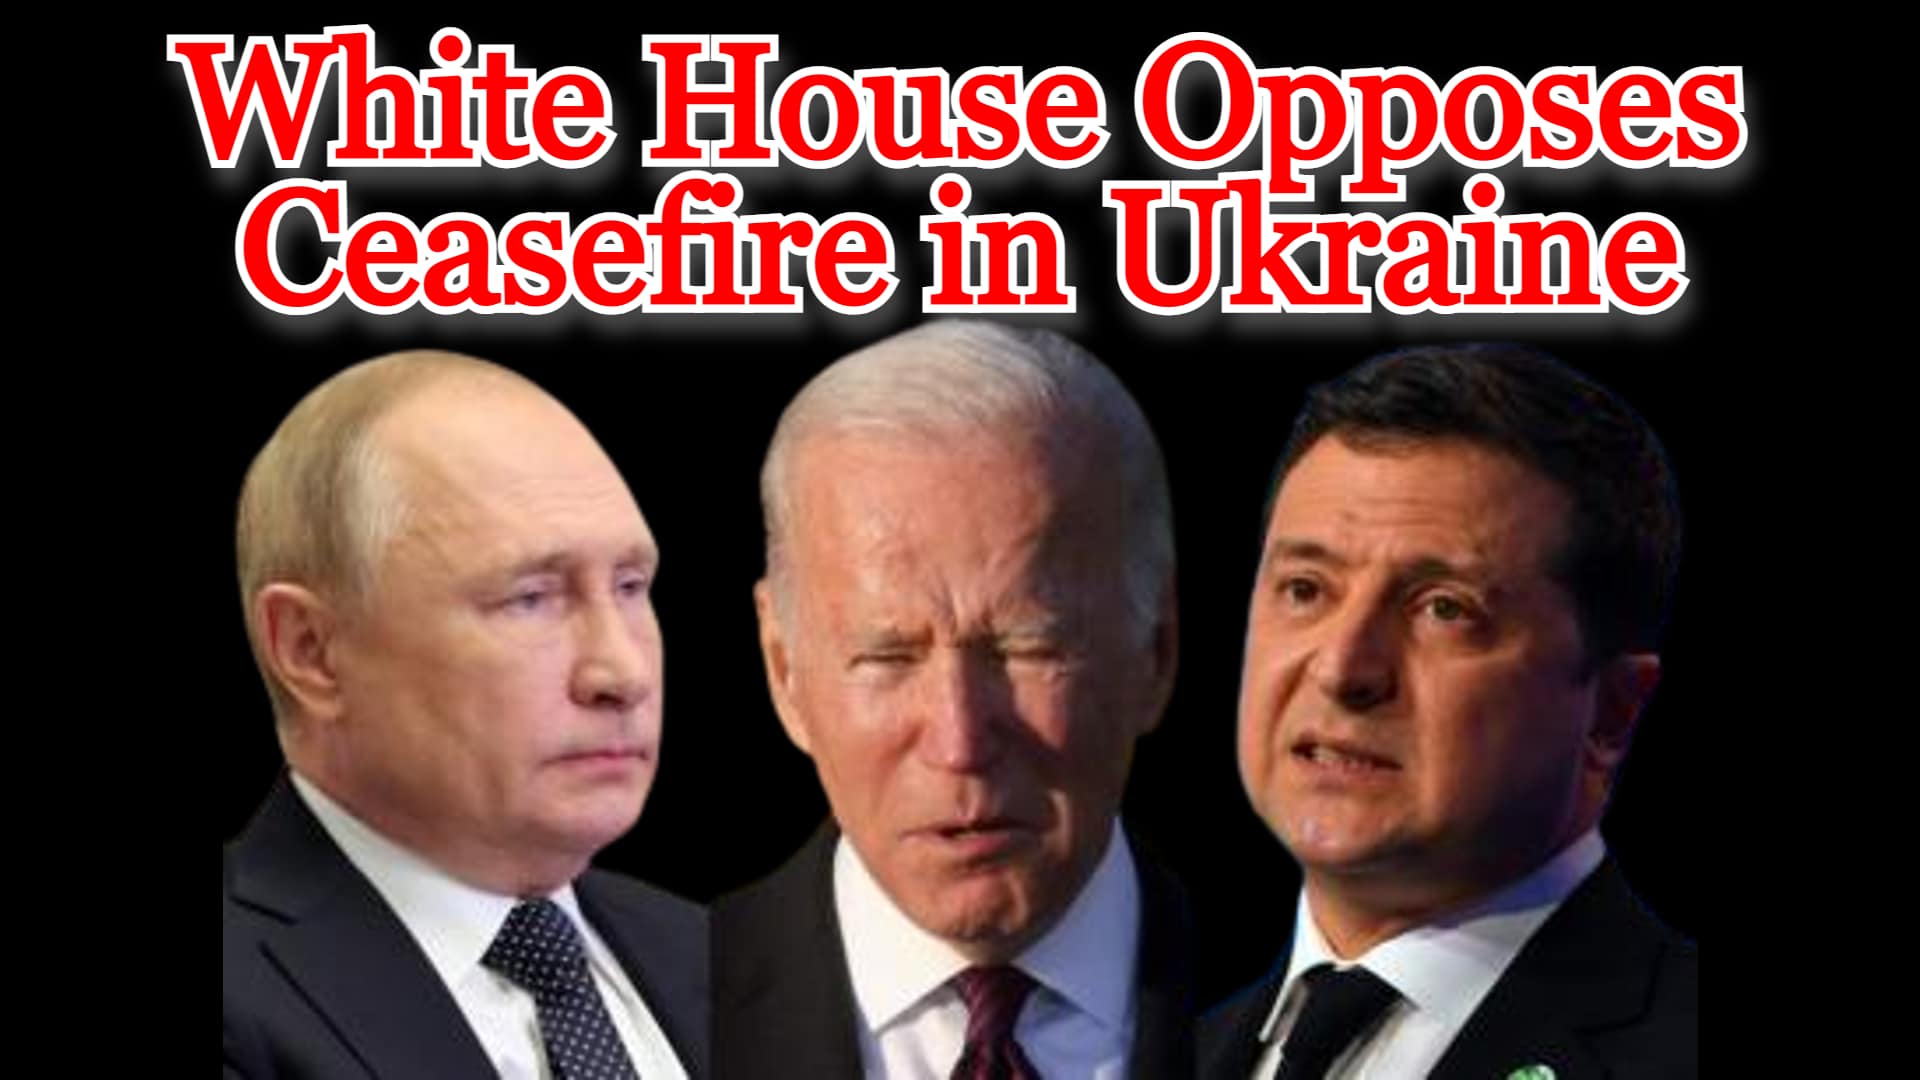 COI #398: White House Opposes Ceasefire in Ukraine